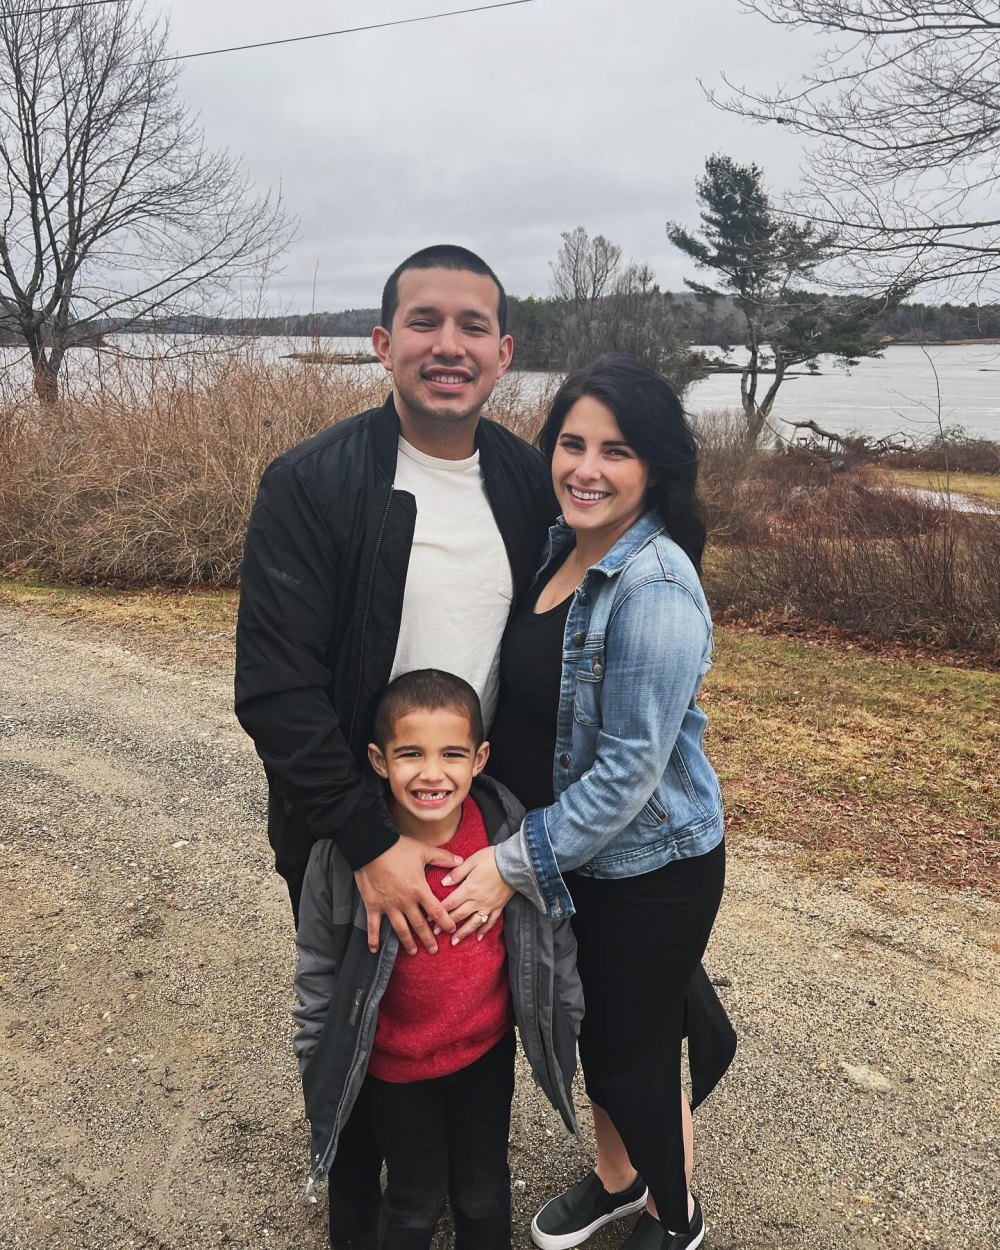 Teen Mom Javi Marroquin and Lauren Comeau Welcome 2nd Baby Together